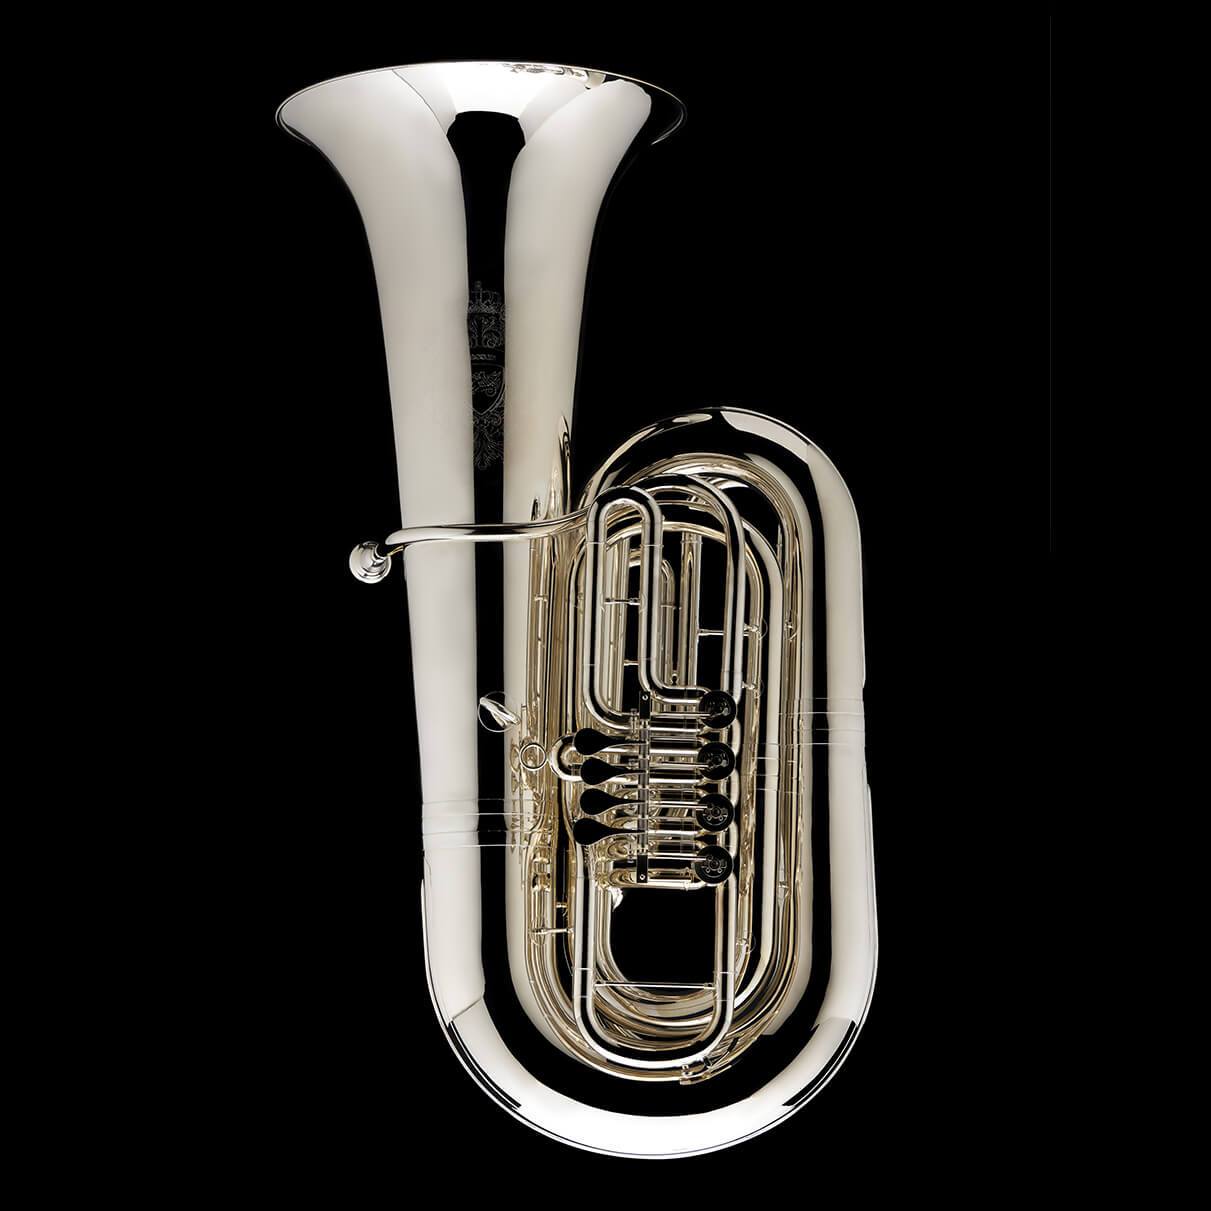 An image of a BBb 6/4 Rotary tuba ‘Kaiser’  from Wessex Tubas